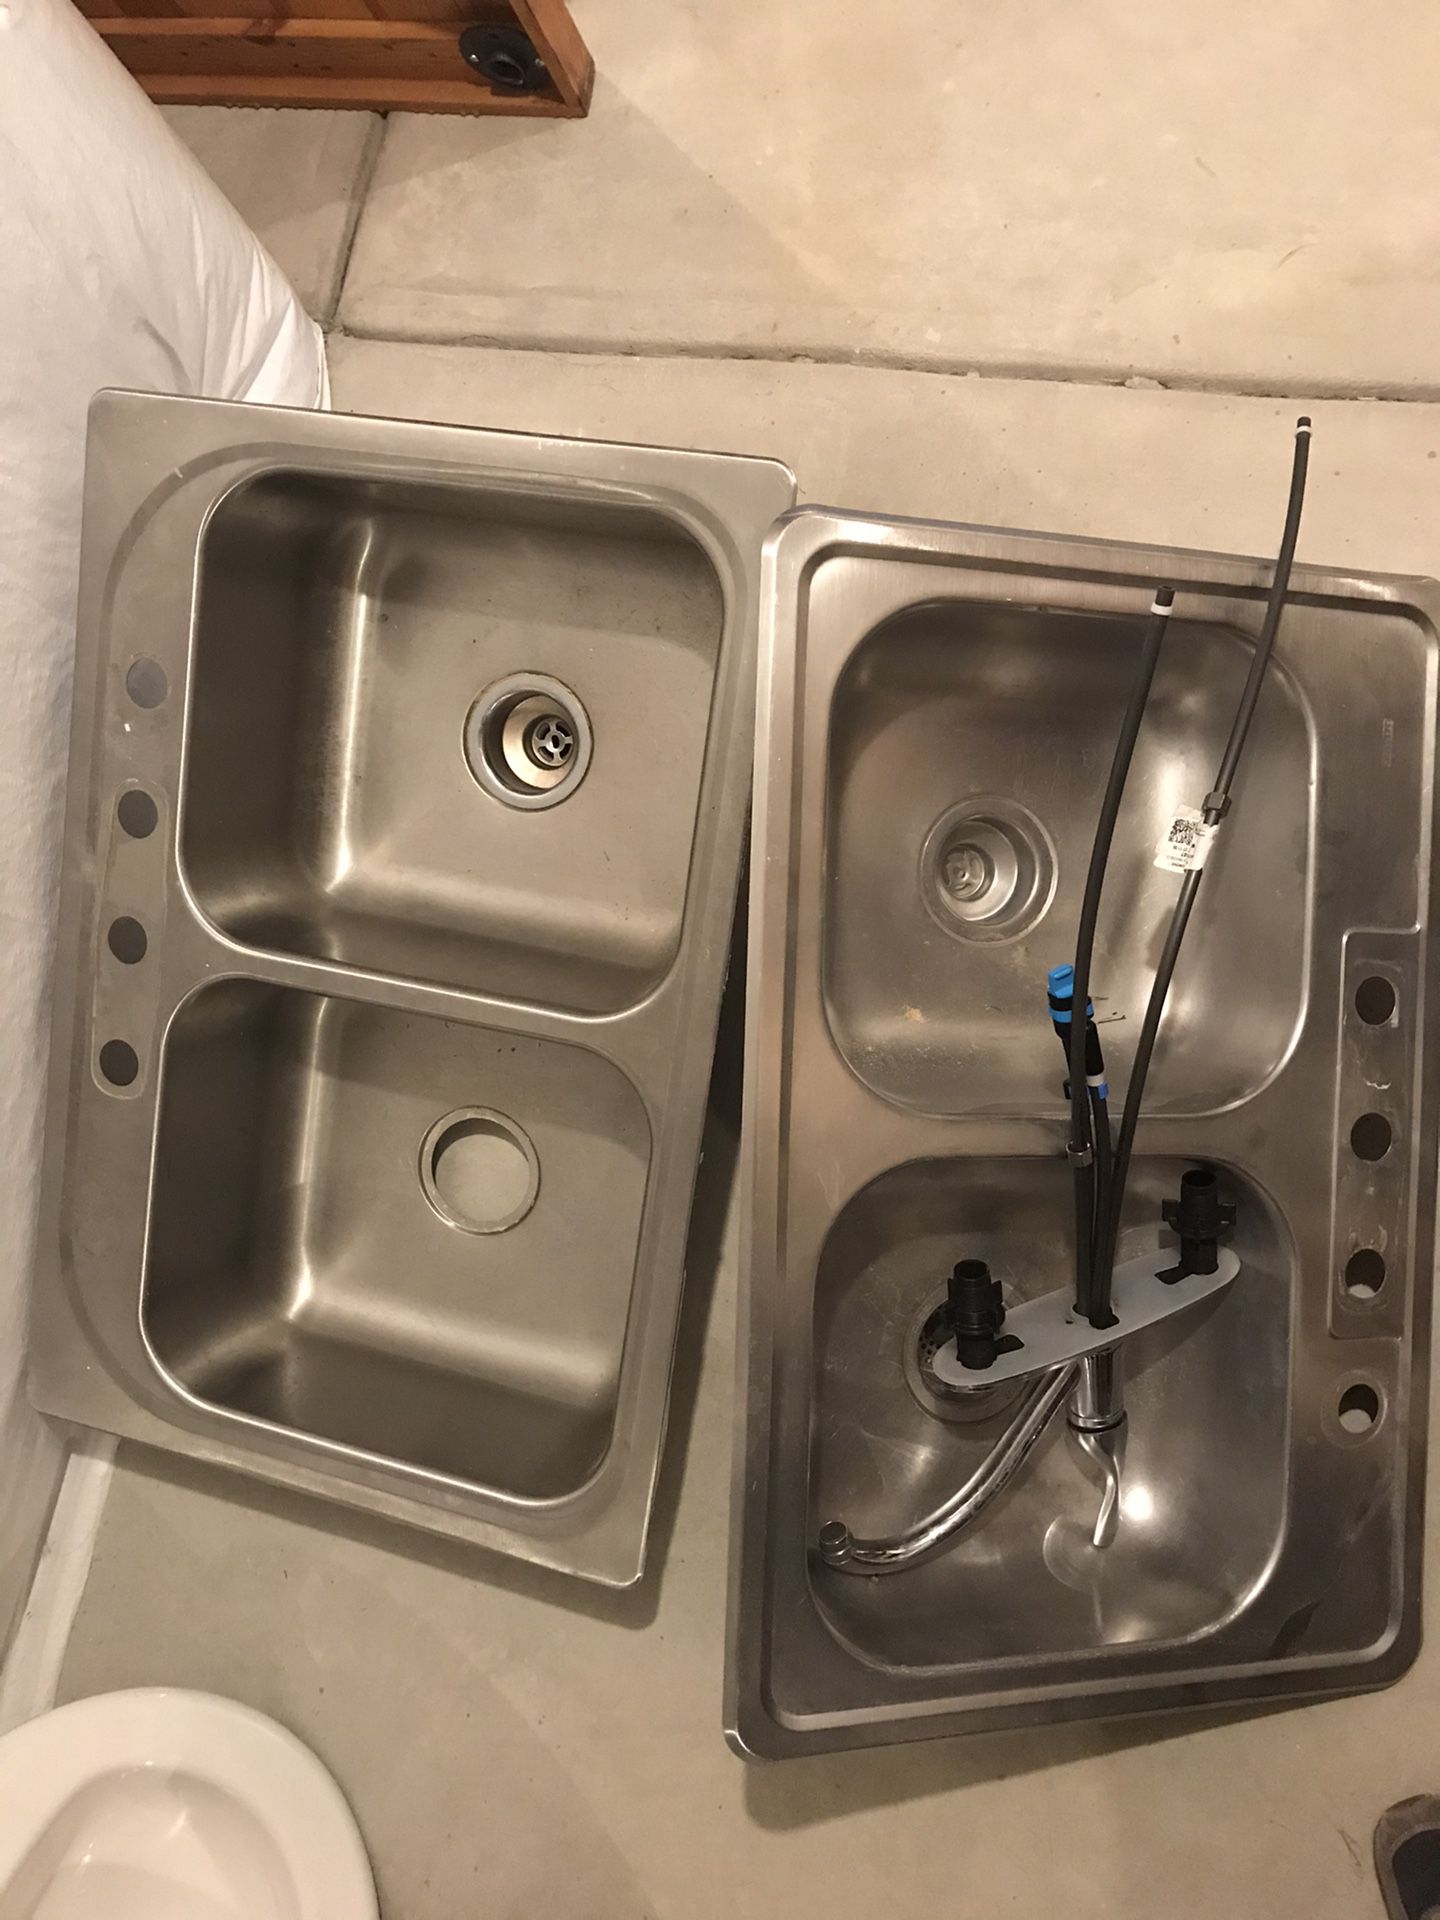 (2) stainless steel kitchen sinks & (1) faucet $50 for both